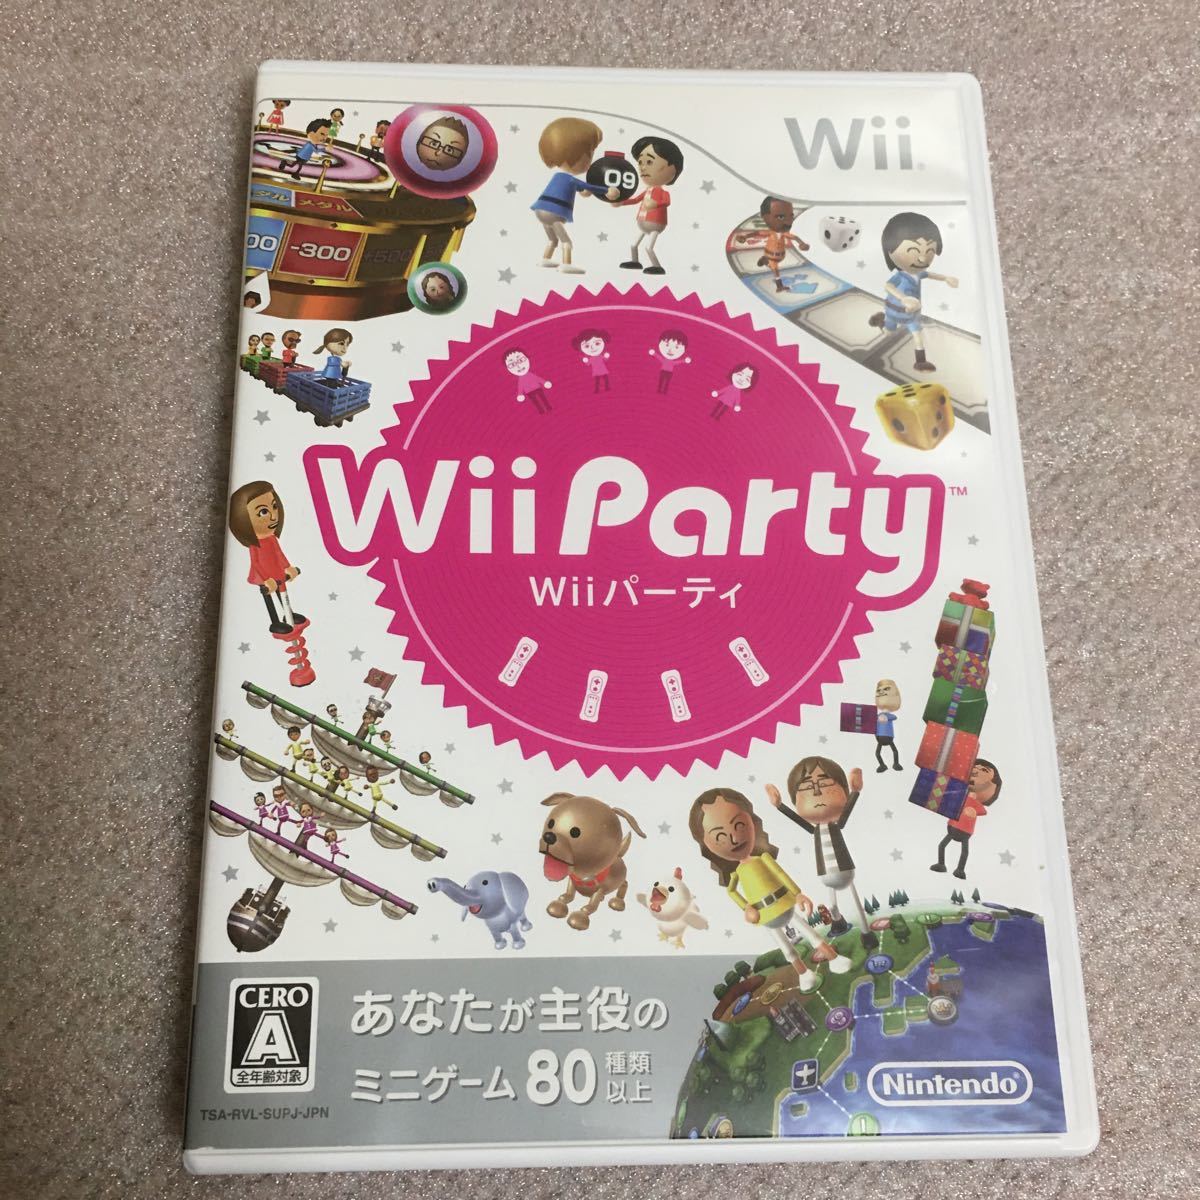 Wiiソフト Wiiパーティ Wii Party